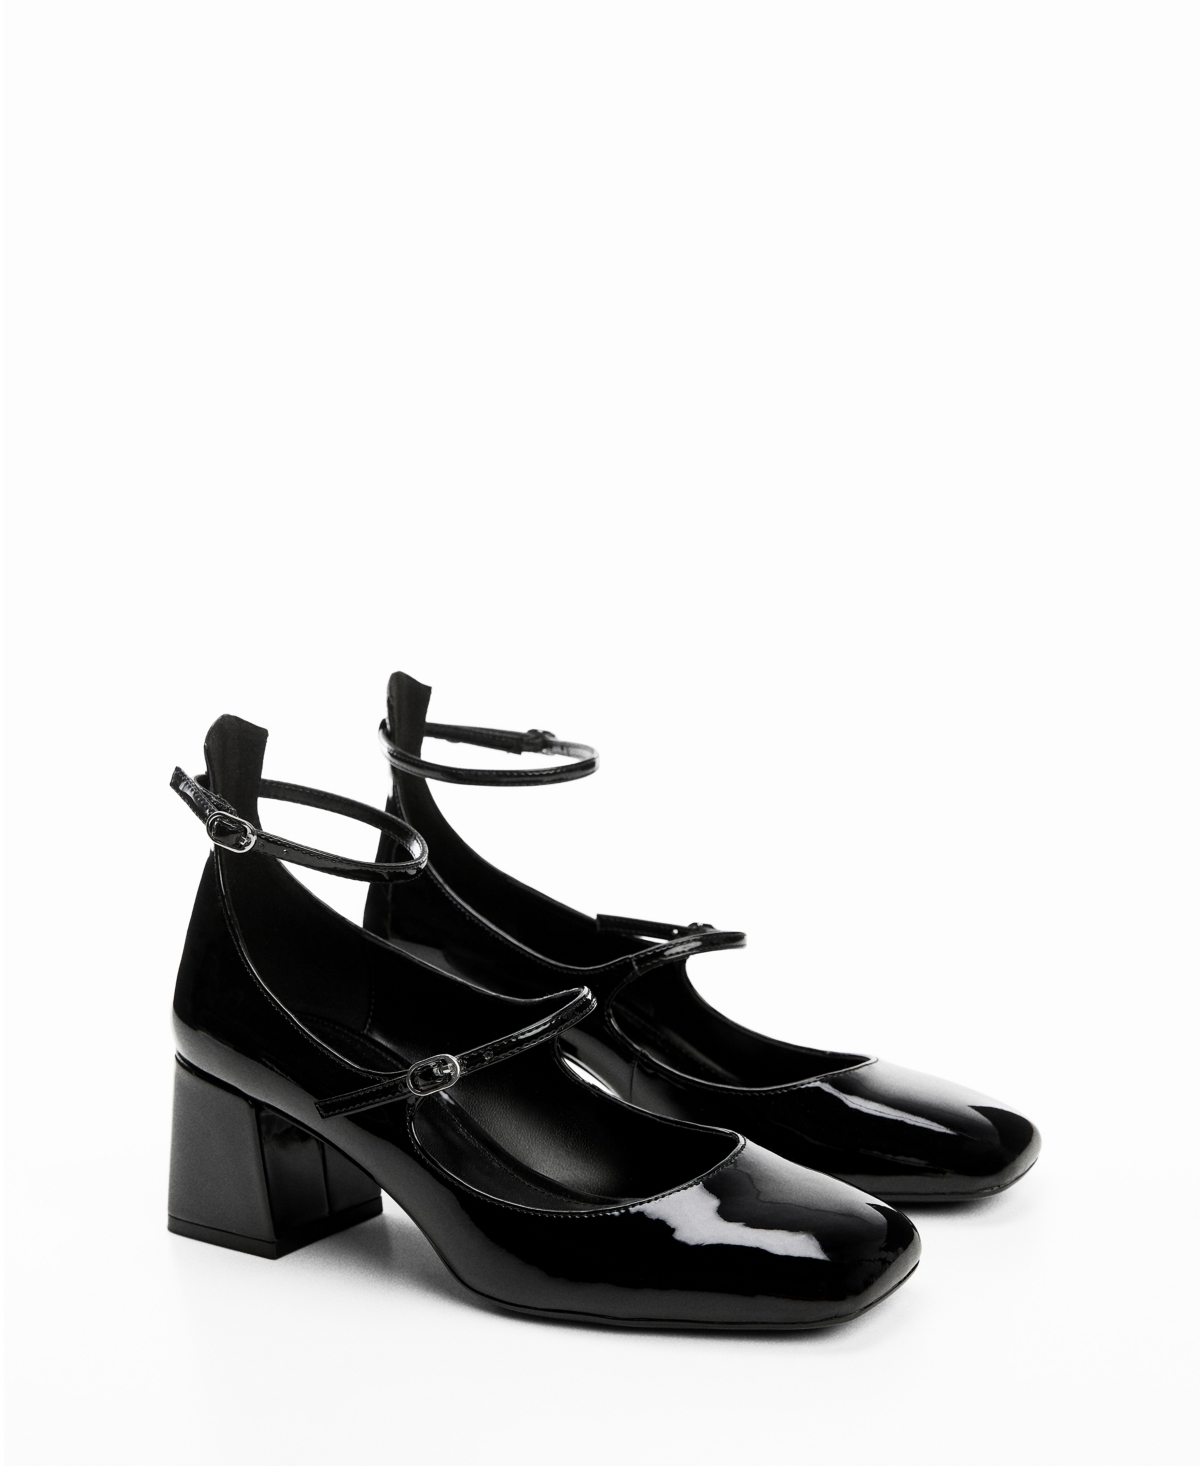 Mango Women's Patent Leather Shoes In Black